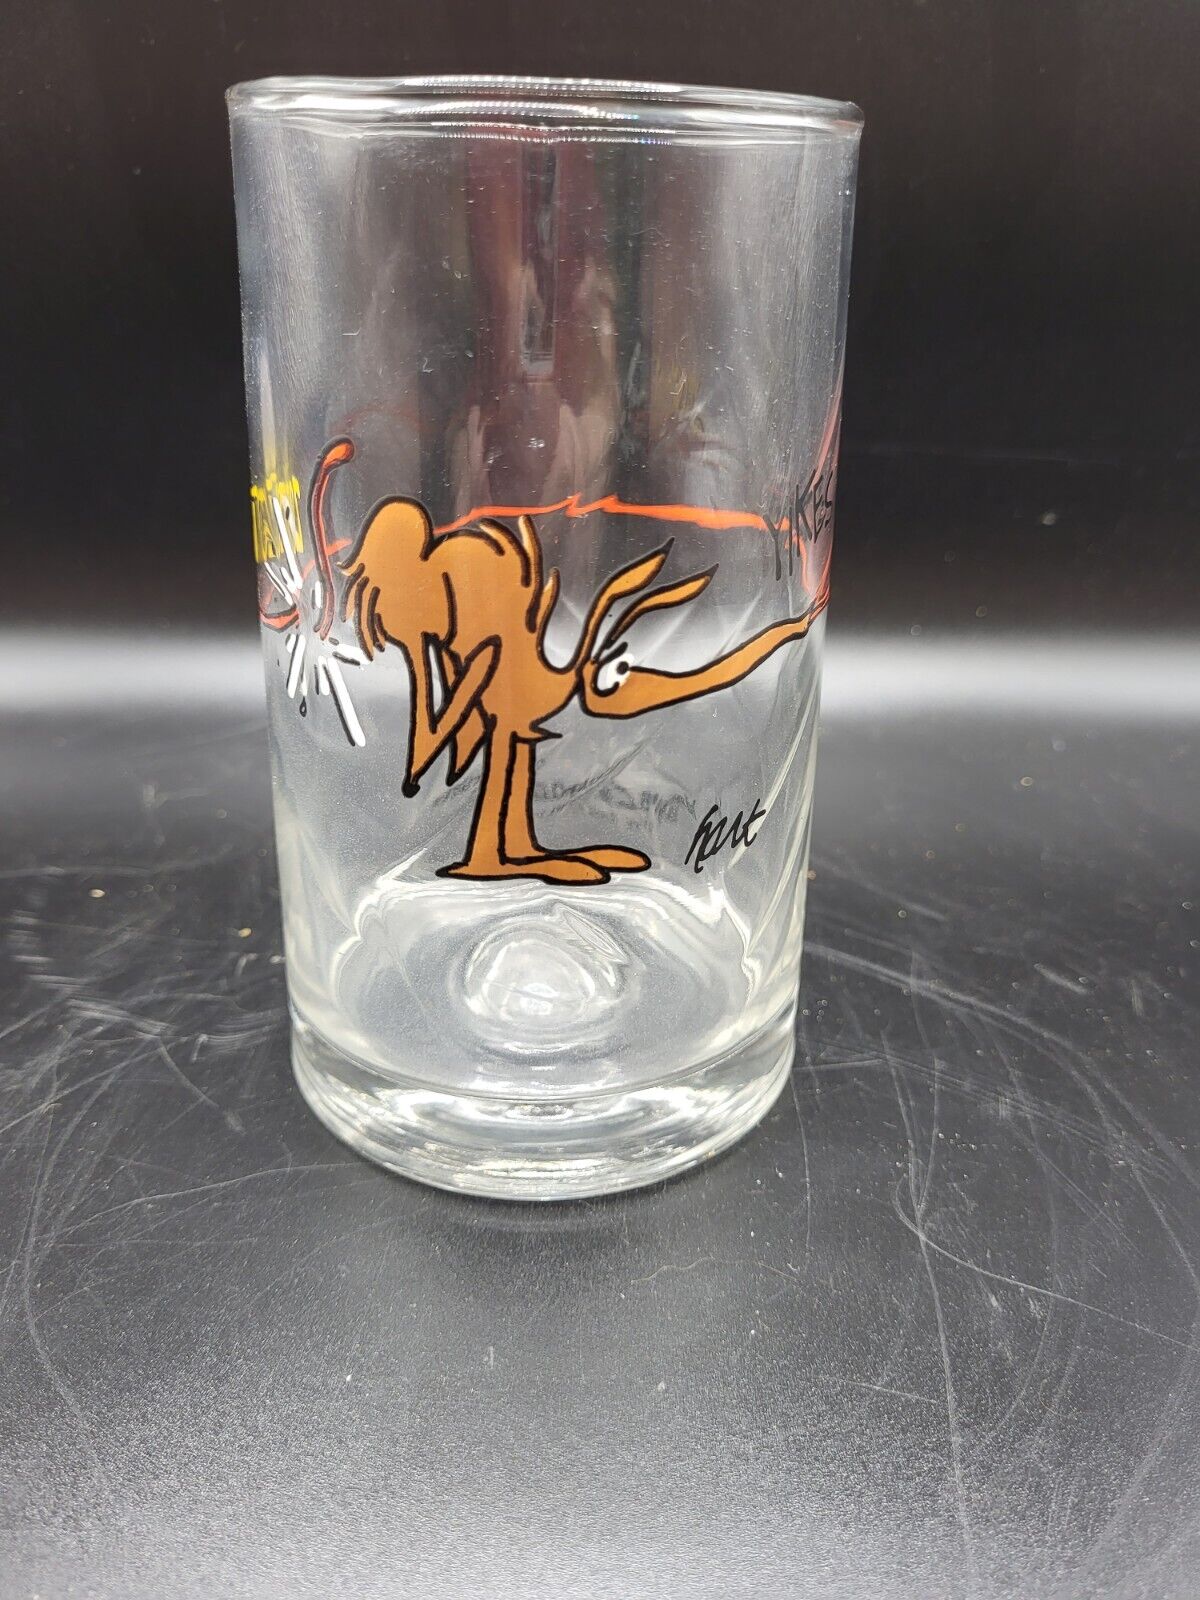  ARBY\'s,  B.C. ICE AGE, COLLECTORS SERIES, DRINKING GLASS, 1981, Vintage.